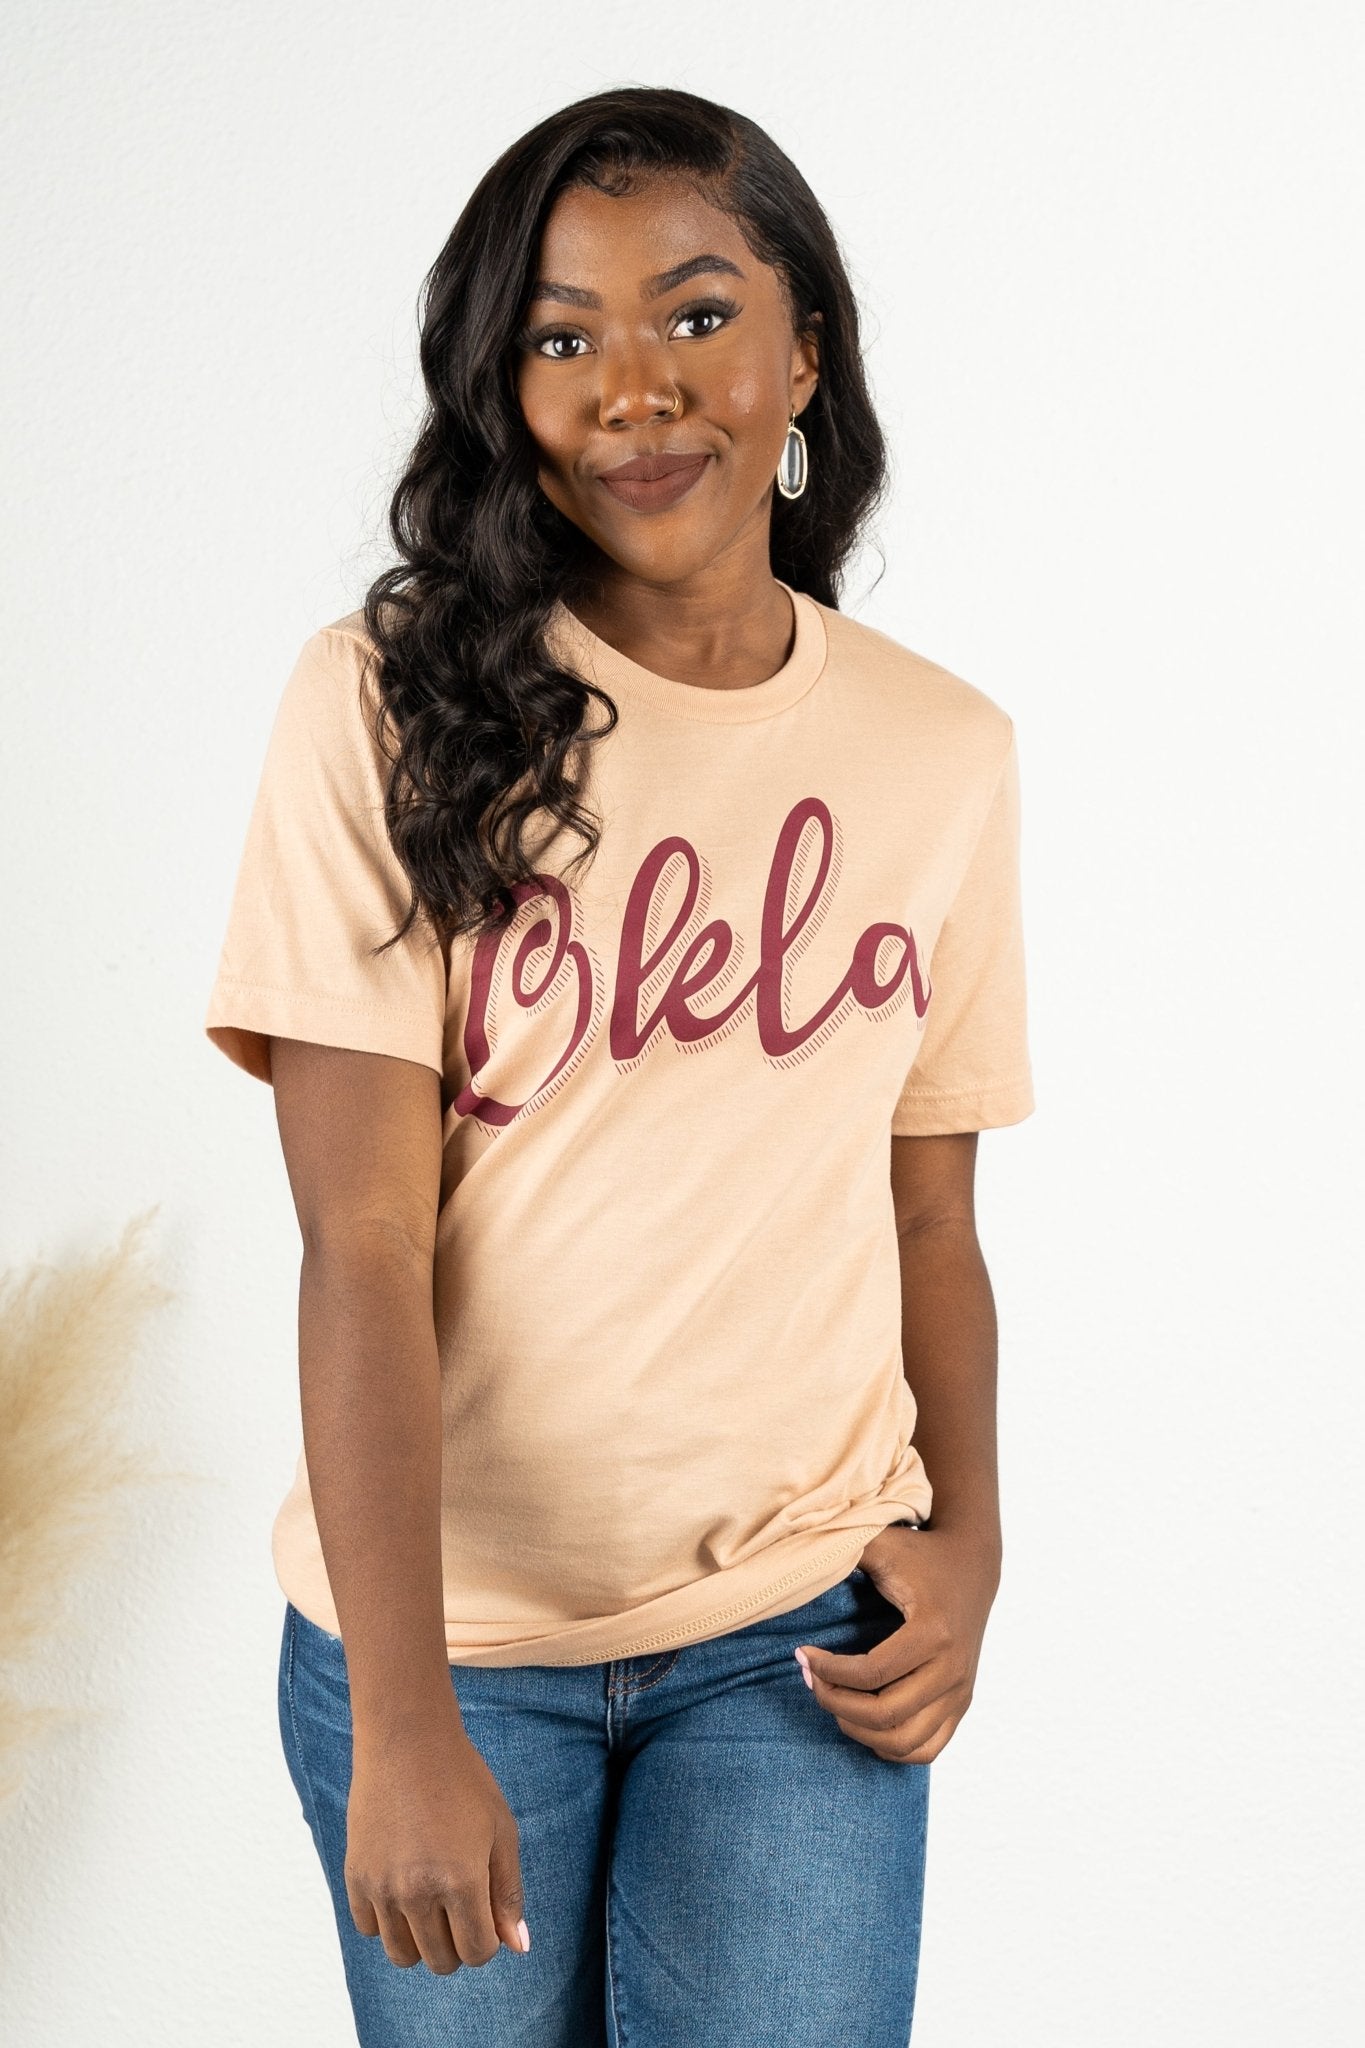 Okla shadow script t-shirt sand - Affordable T-shirts - Boutique Graphic T-Shirts at Lush Fashion Lounge Boutique in Oklahoma City